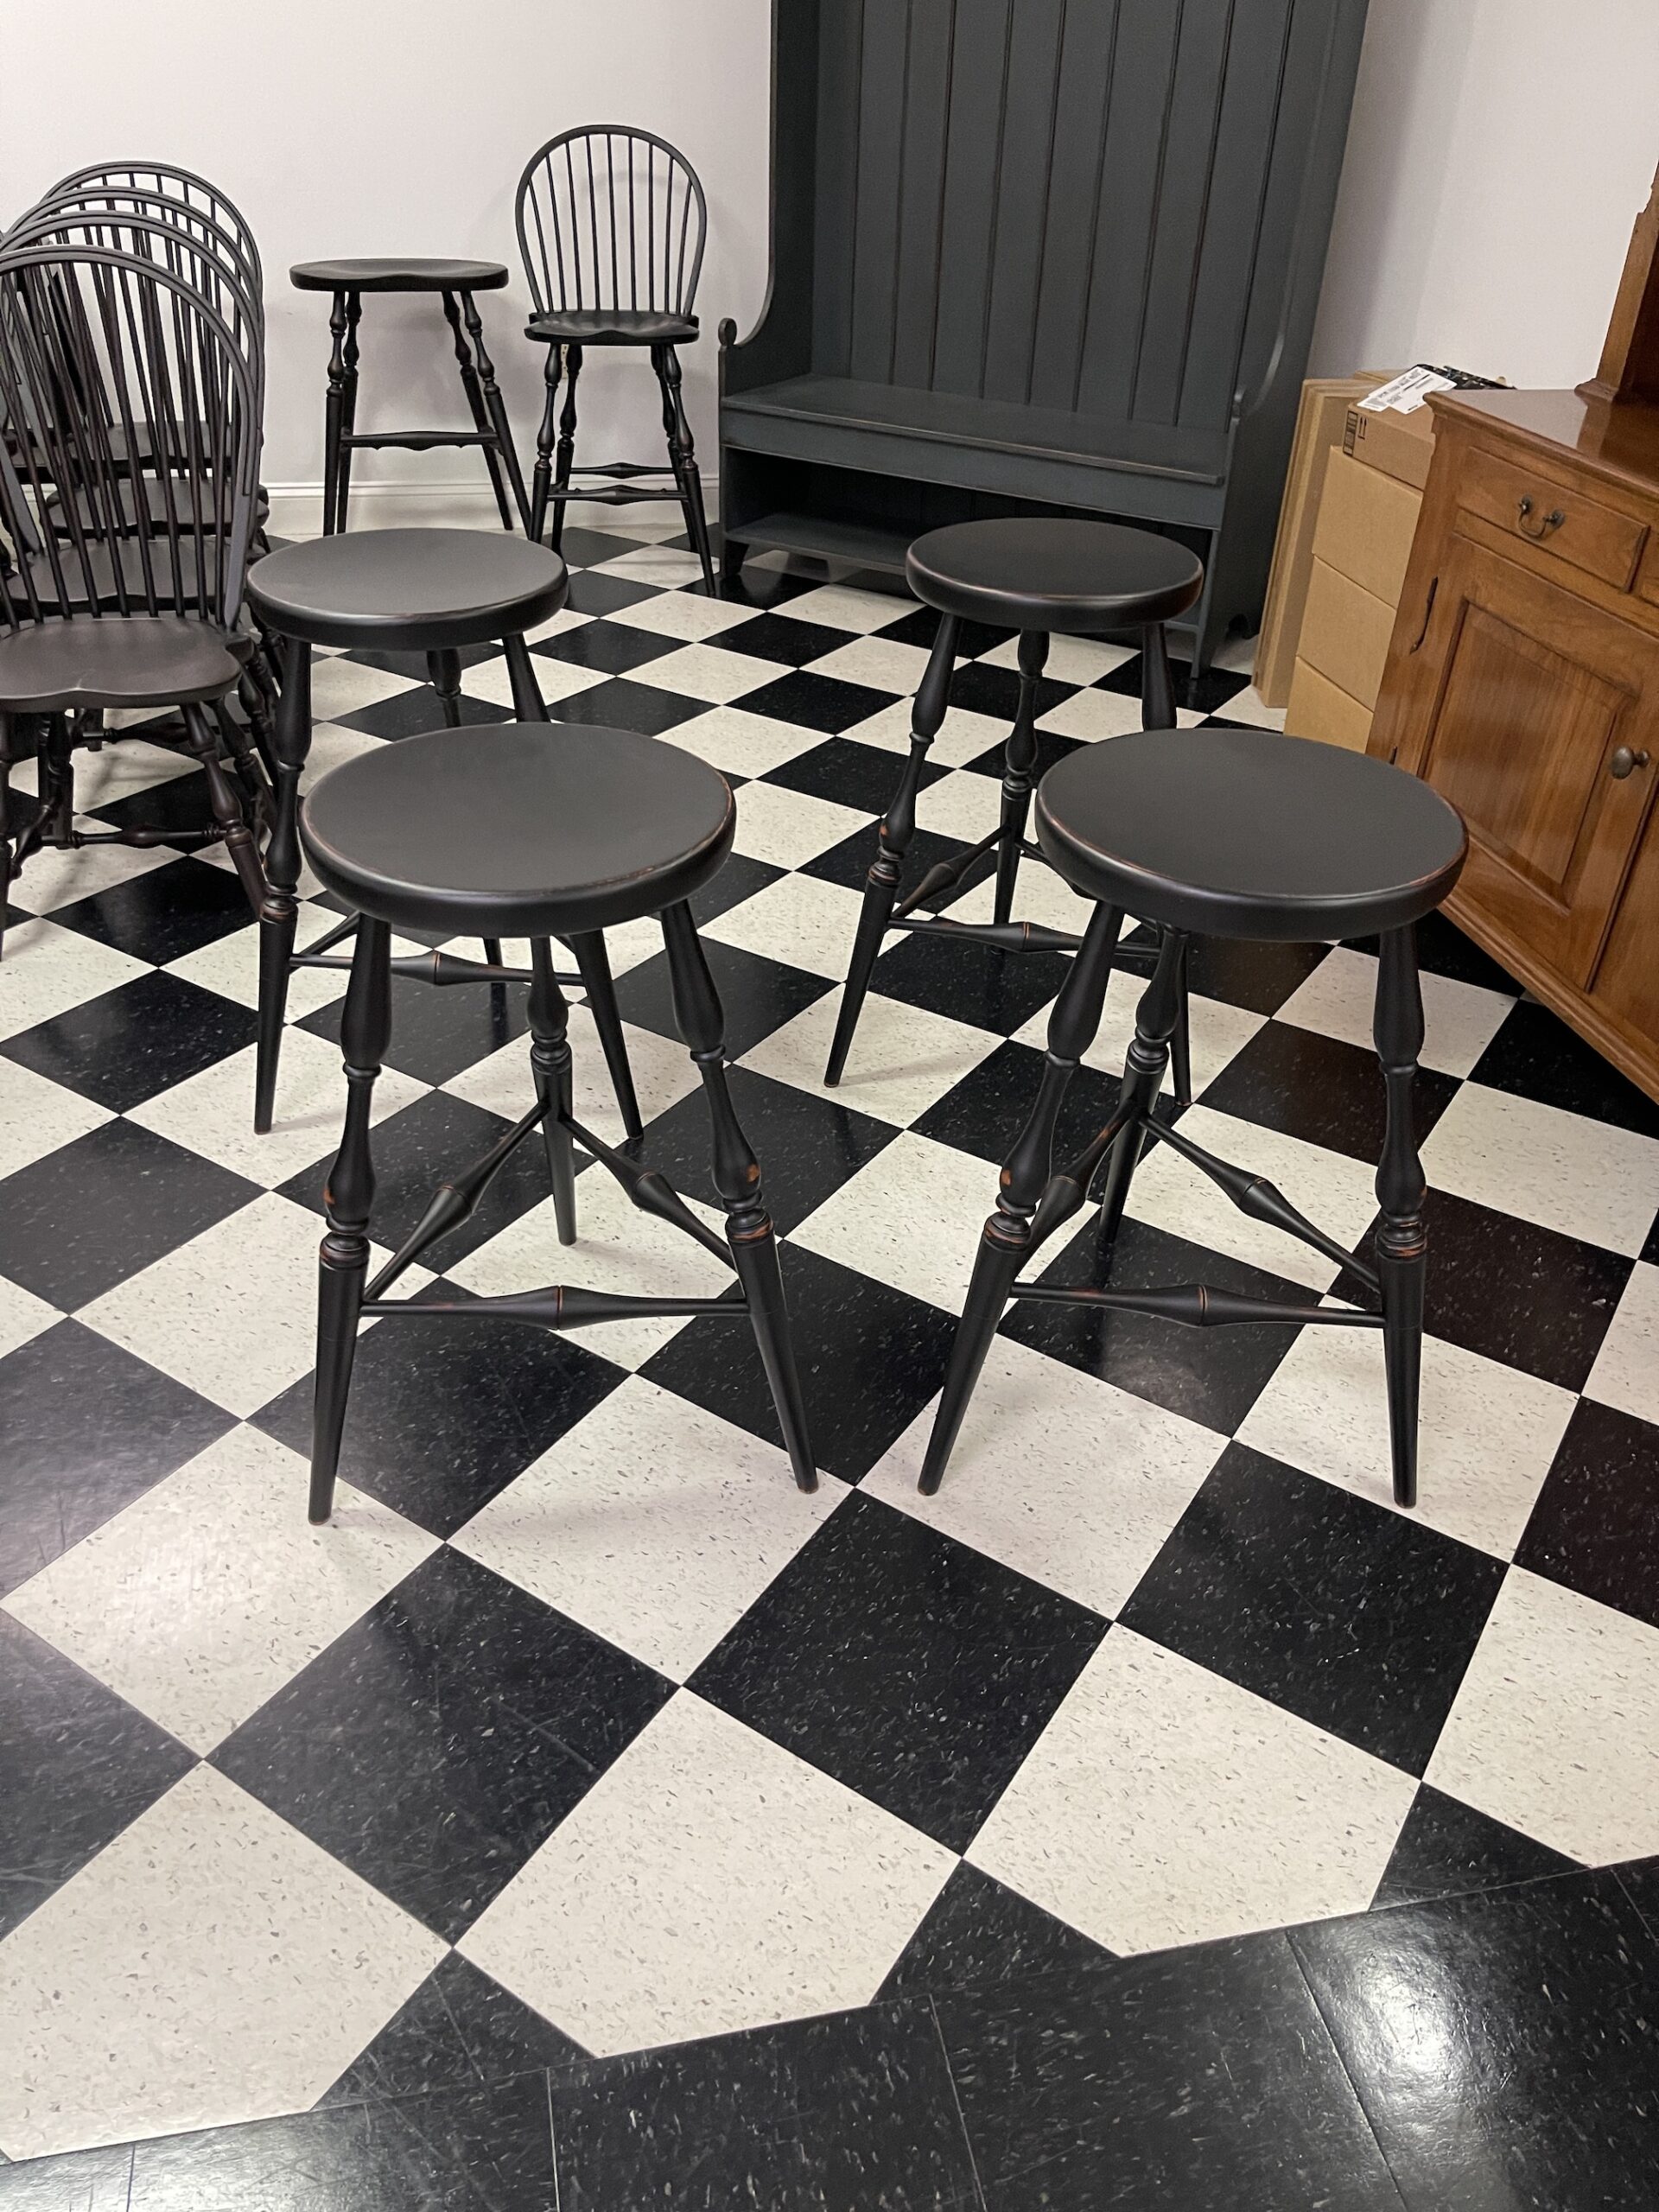 Four Historical Pennsylvania Stools - 29in Seat Height Image